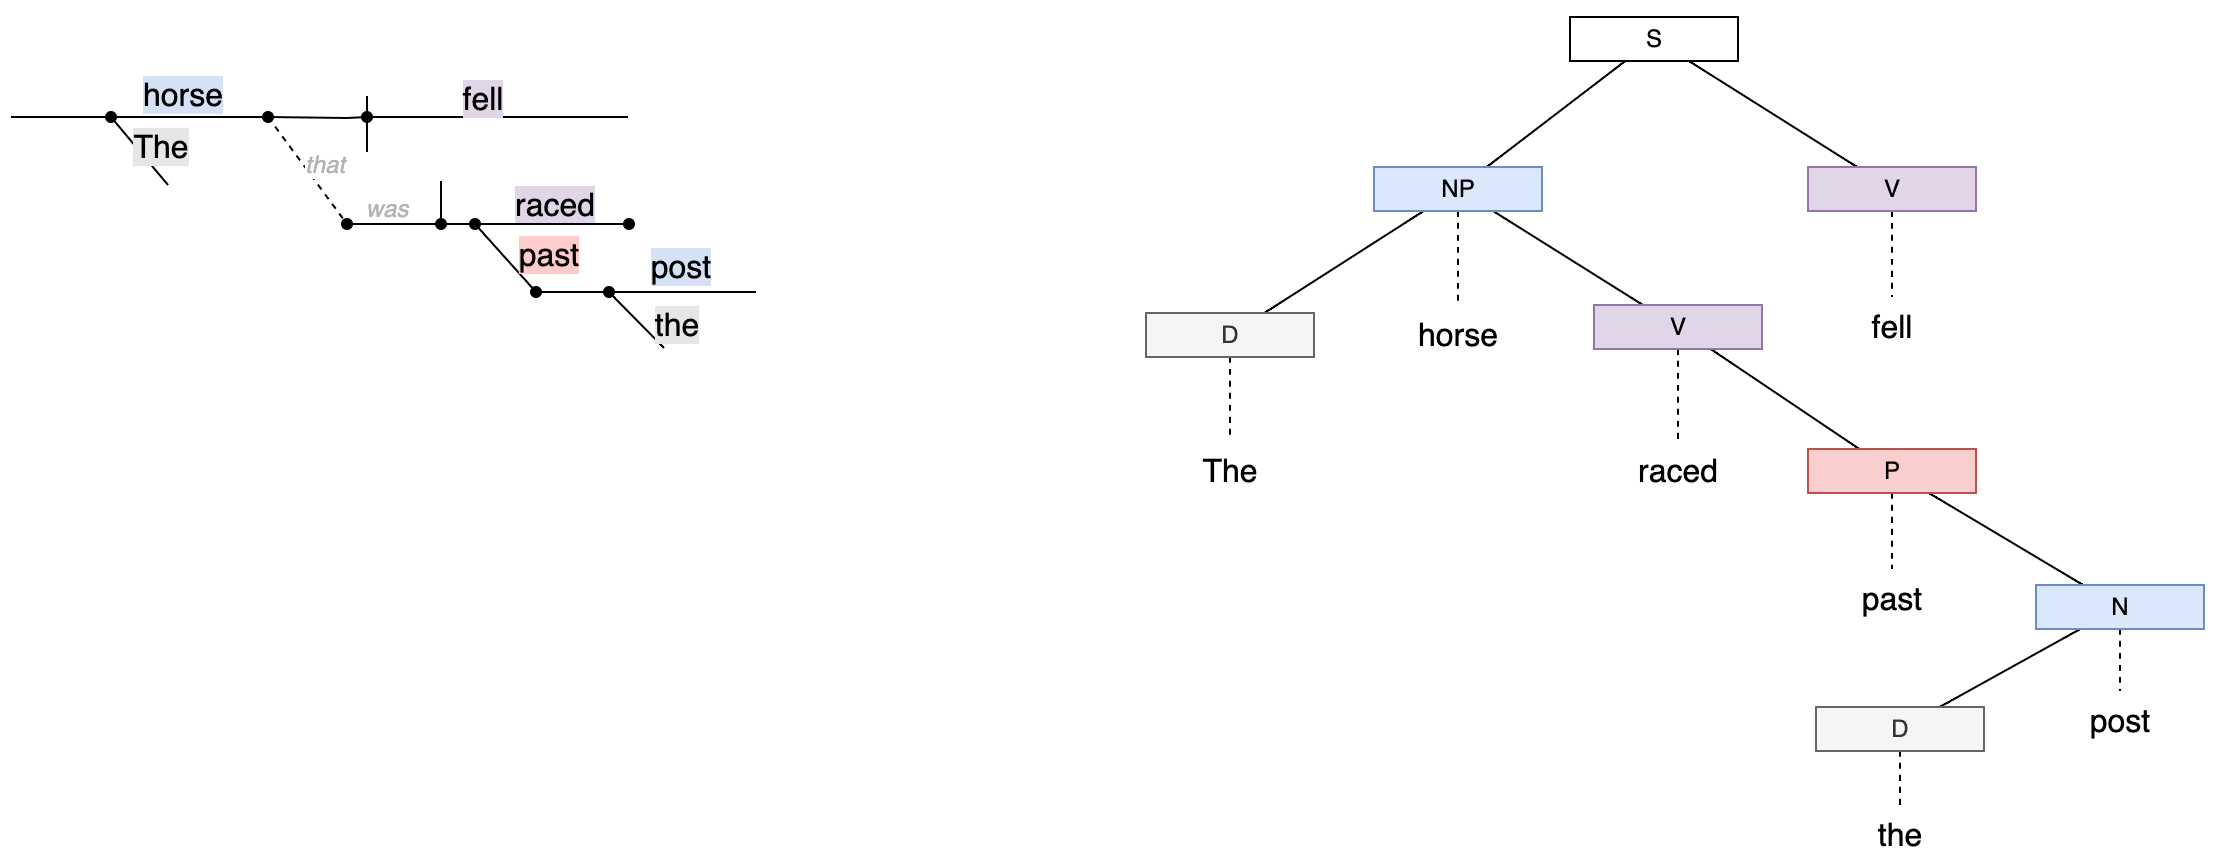 Sentence diagrams and Reed-Kellogg diagrams are easy to draw in draw.io